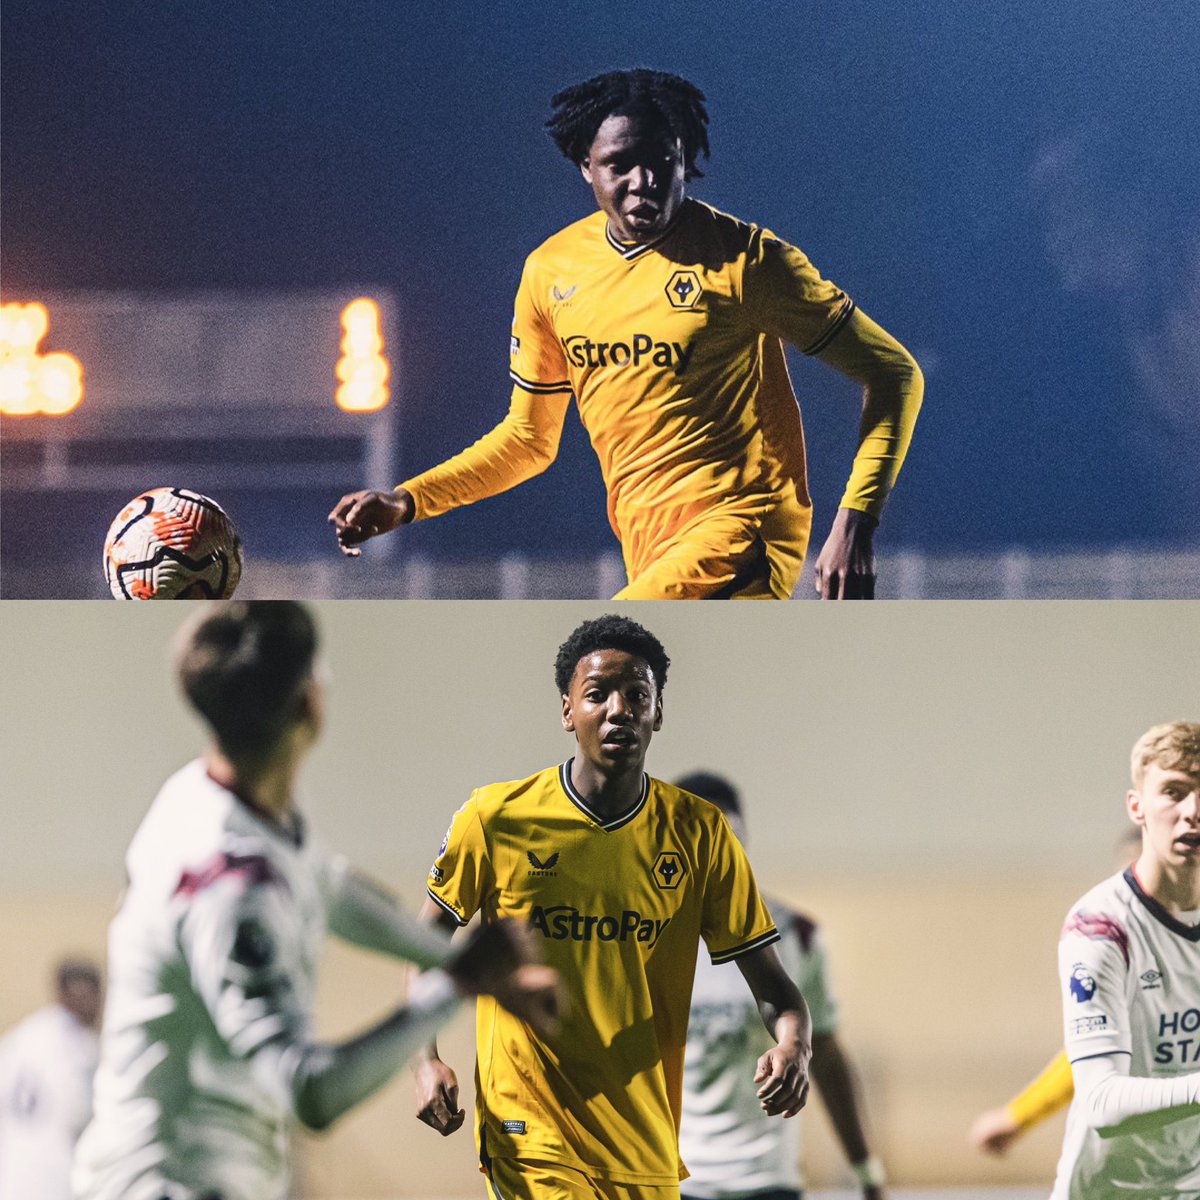 Top Premier League clubs are taking an interest in young Wolves talents Wesley Okoduwa and Alvin Ayman. #Wolves are hoping thag first team exposure for both players will keep them at Molineux with Gary O'Neil is keen to promote young stars. 📰 @LiamKeen_Star | #WWFC